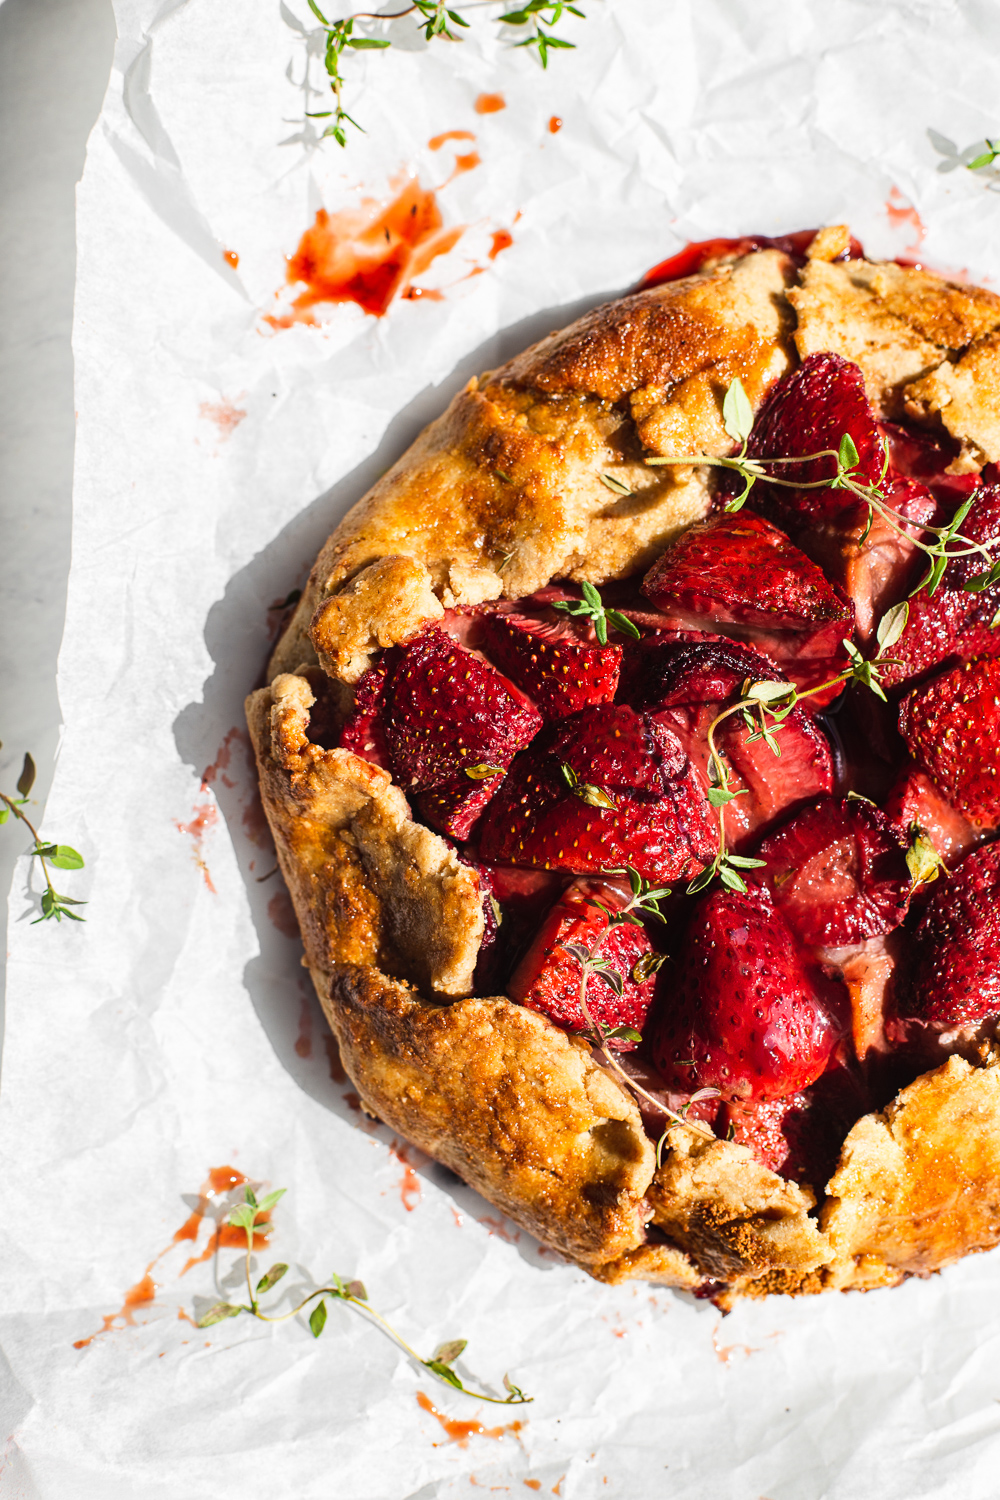 Rustic Strawberry Galette with Thyme| harsh light photography